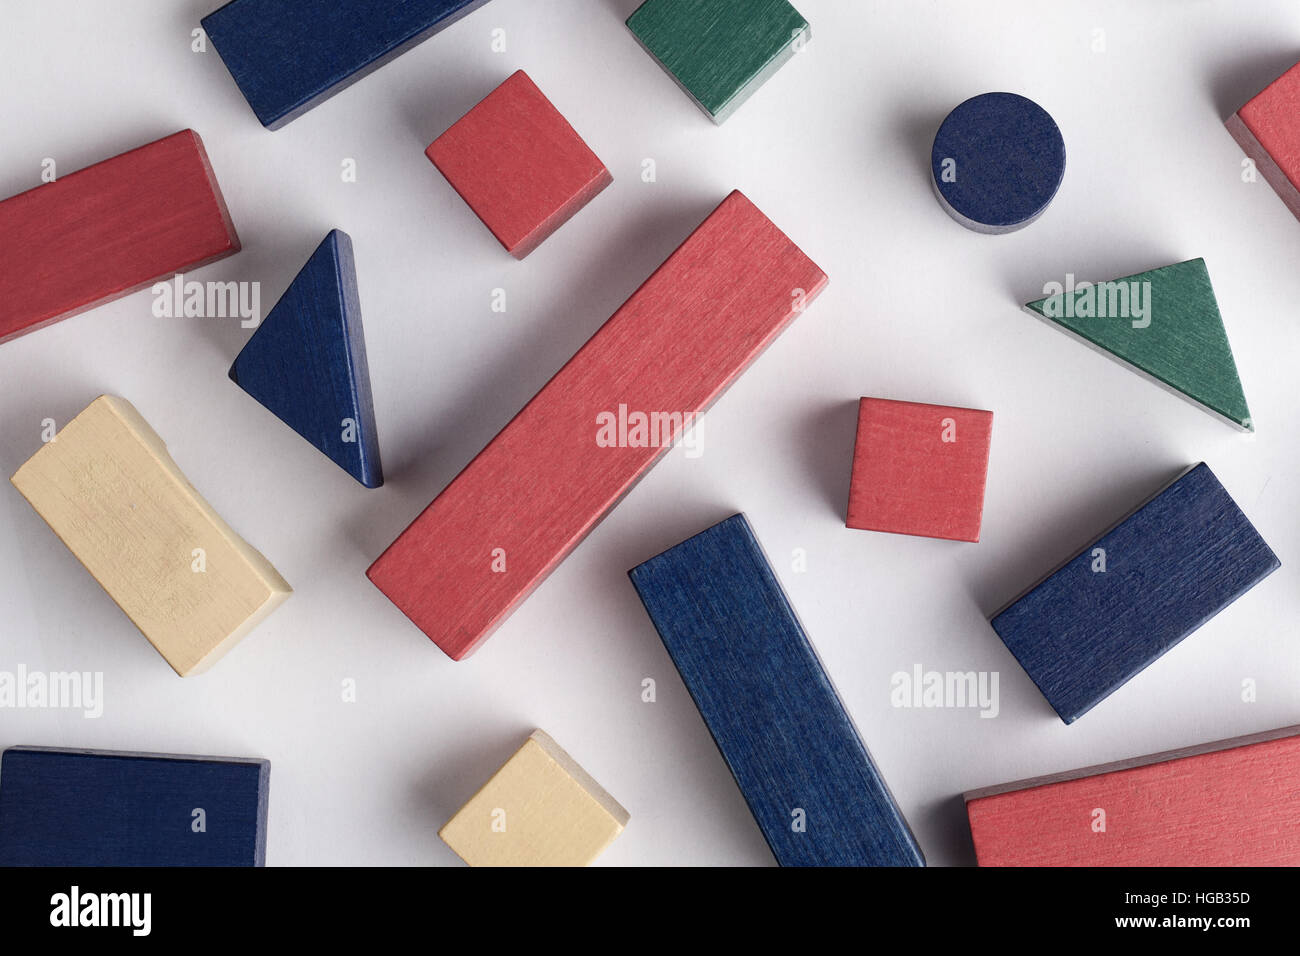 abstract composition with colored toy building blocks of many shapes on white background Stock Photo